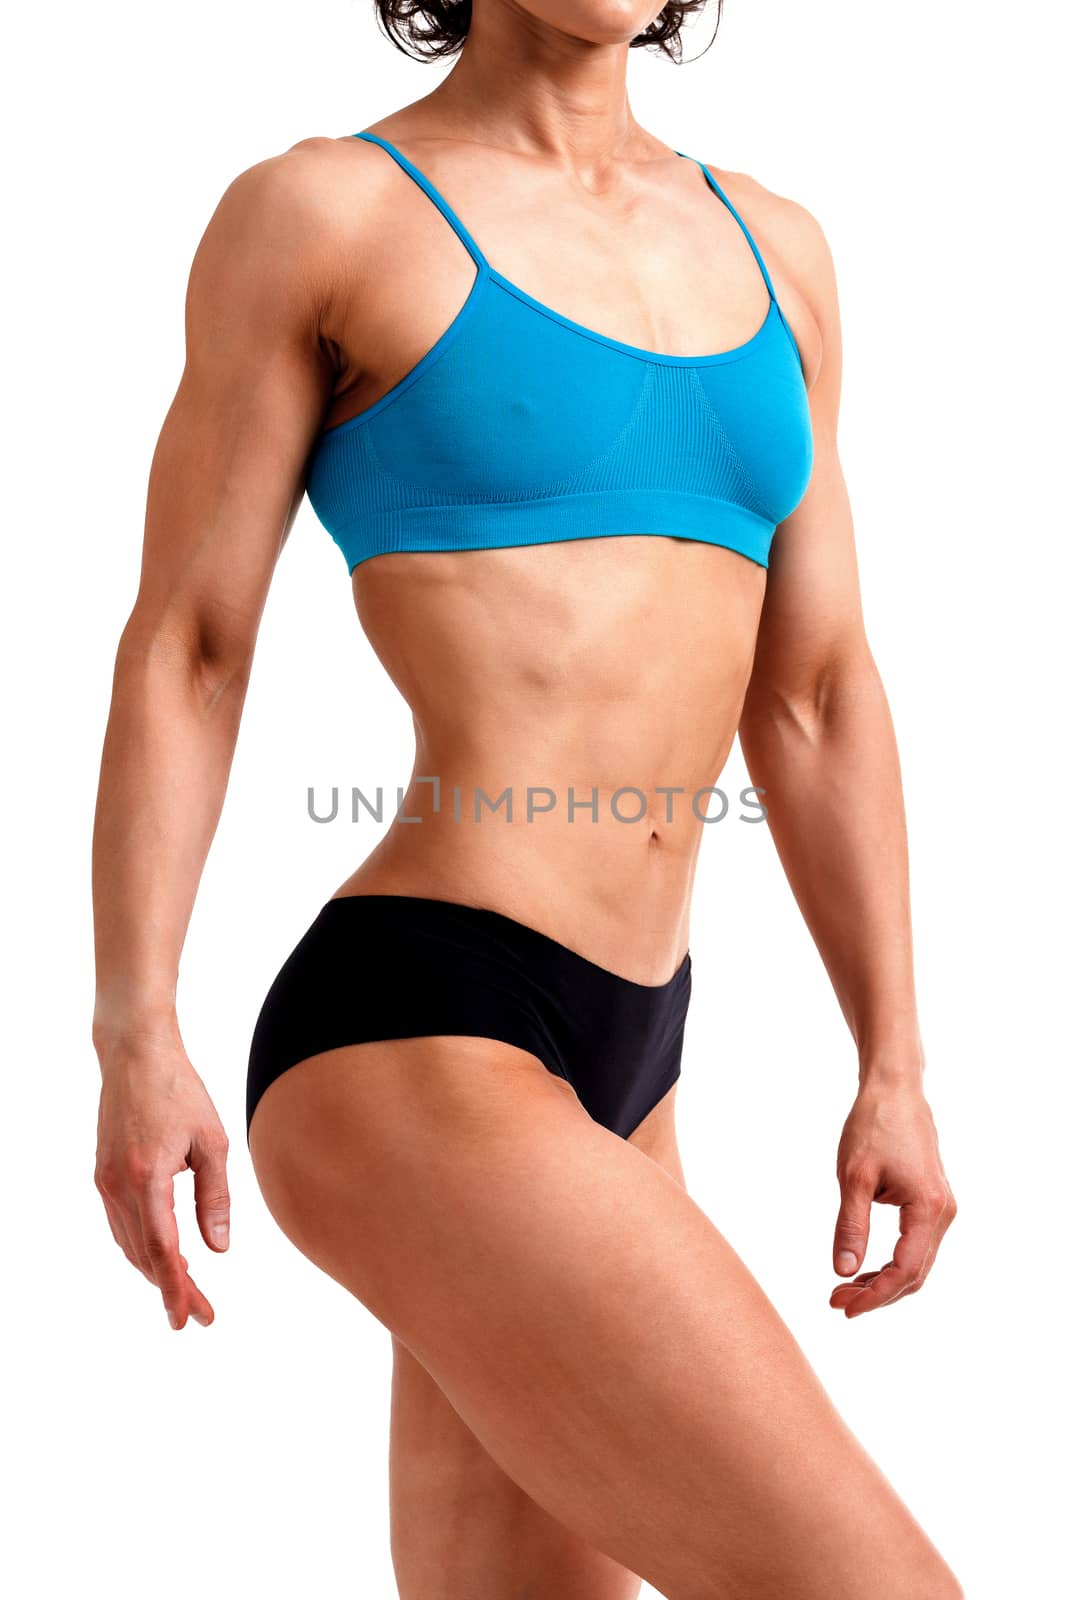 Fitness woman posing against a white background, isolated